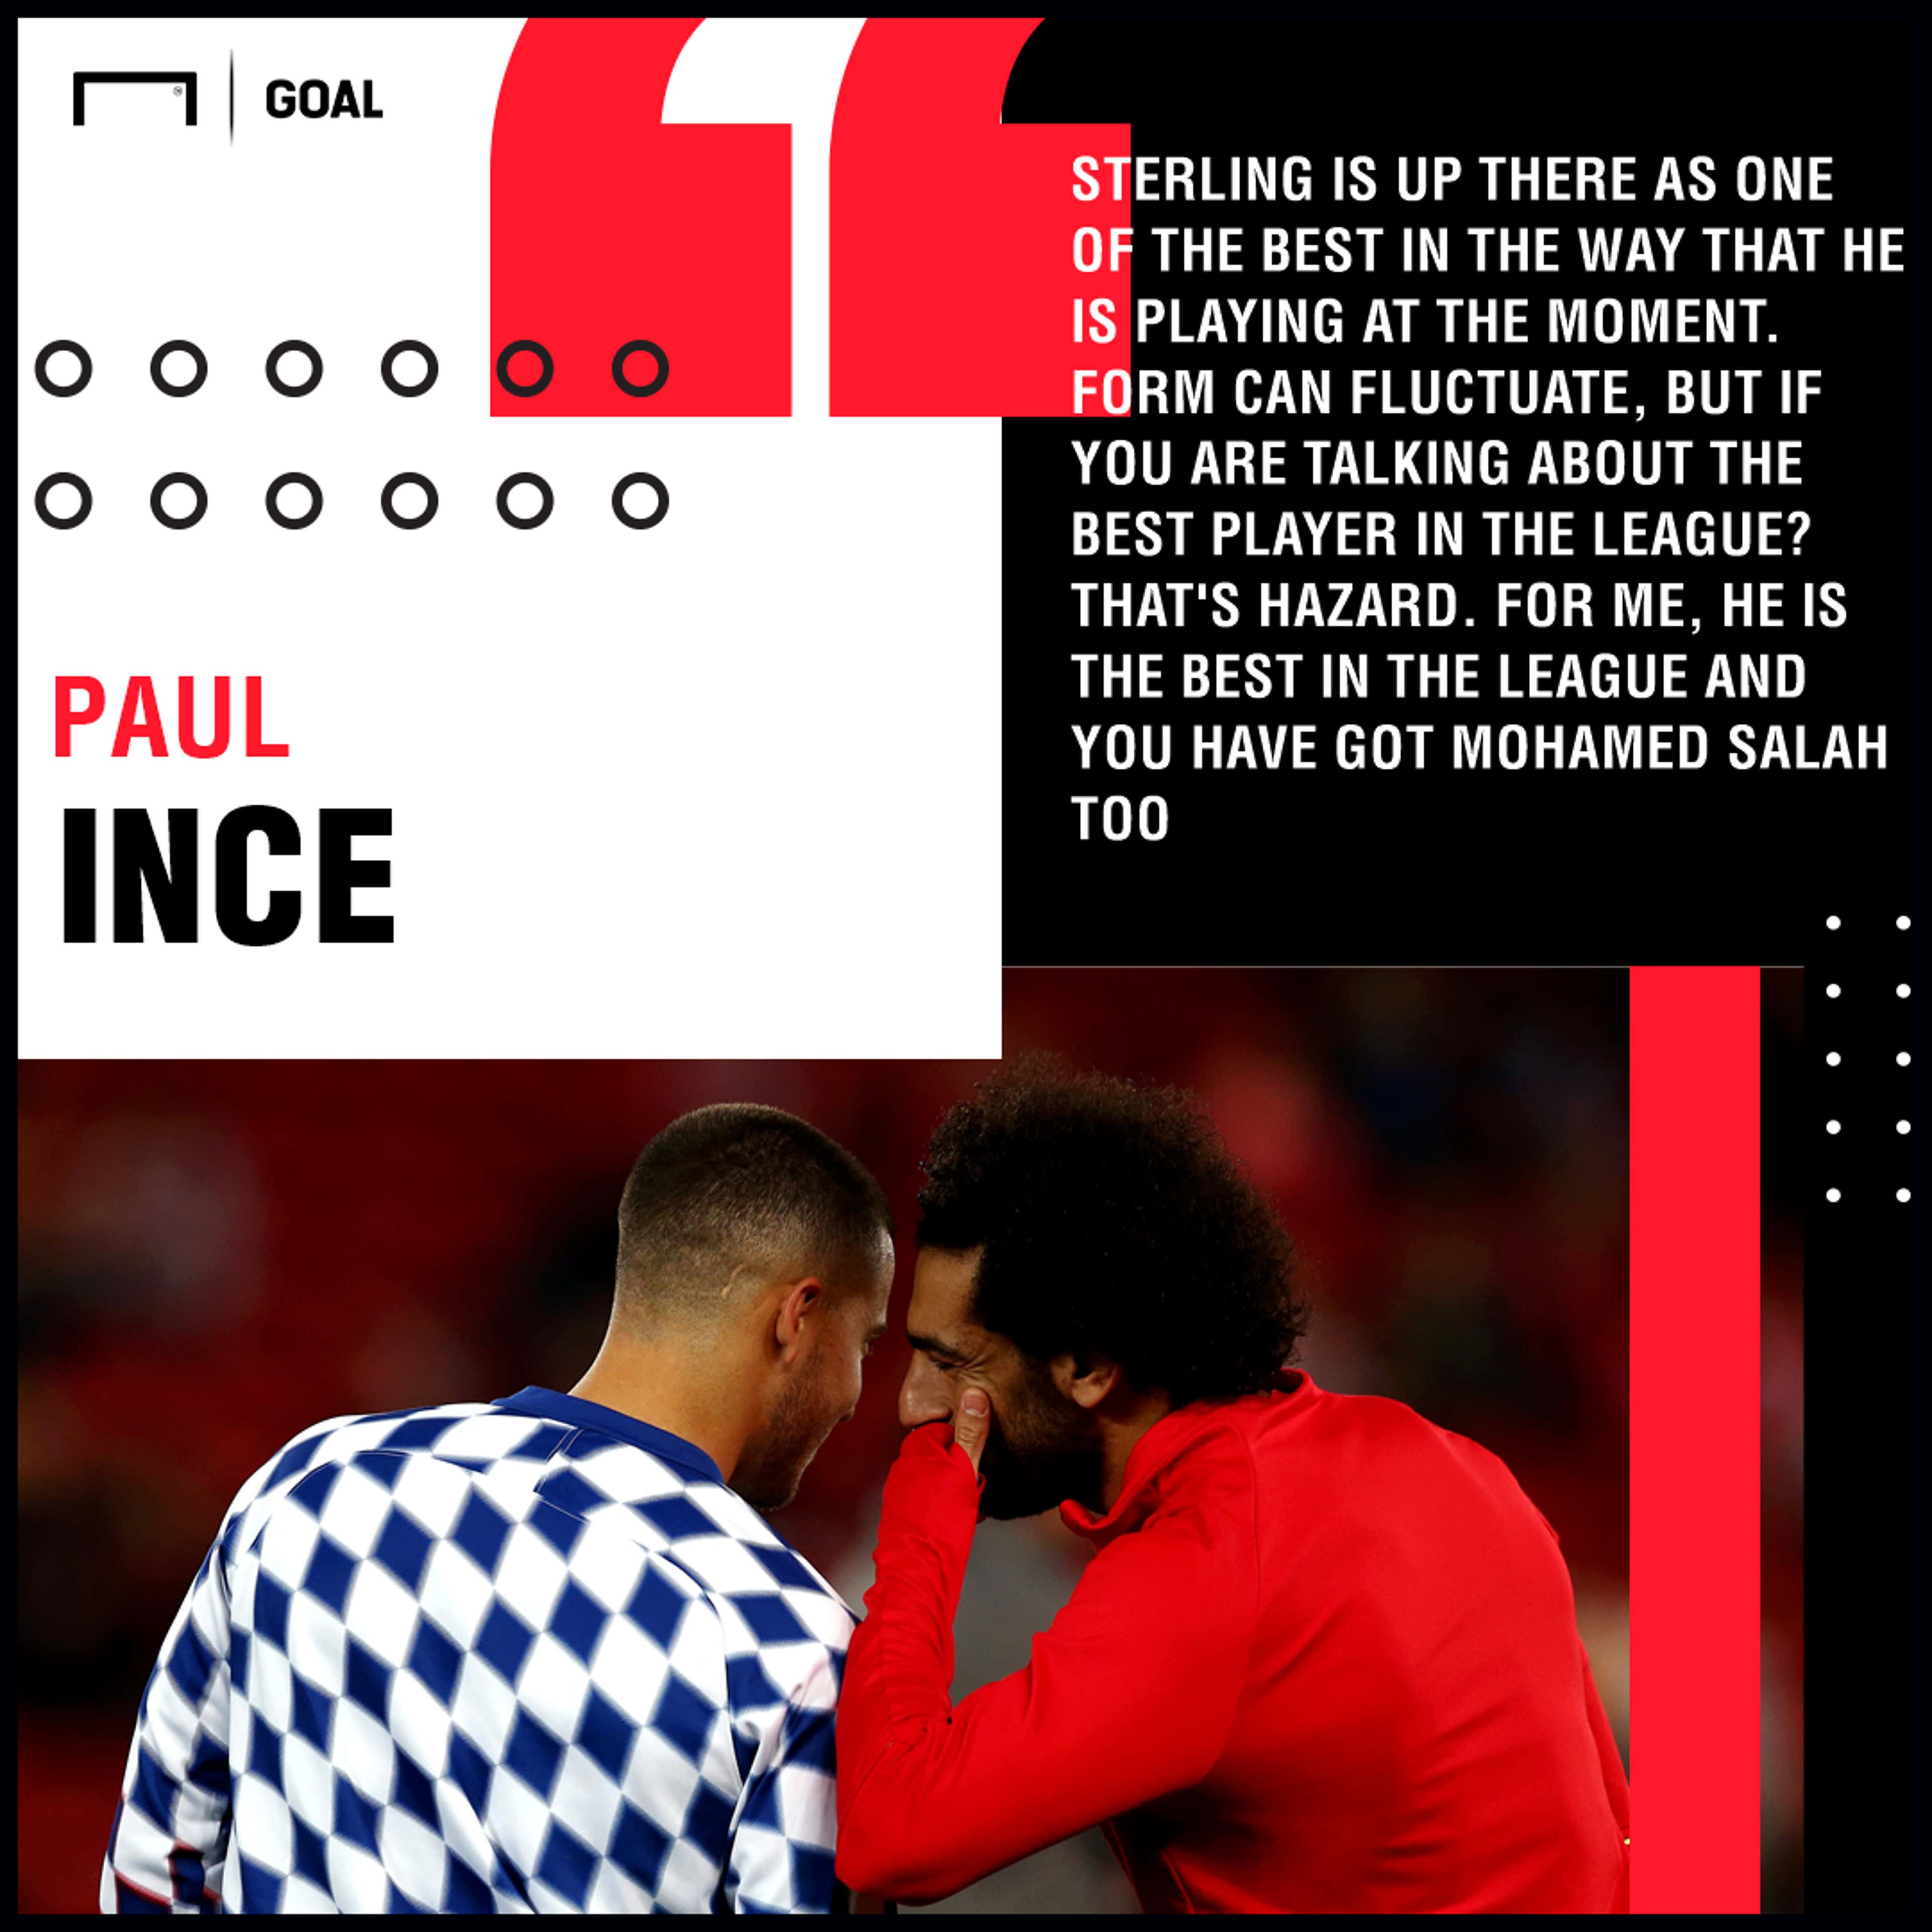 Paul Ince quote GFX